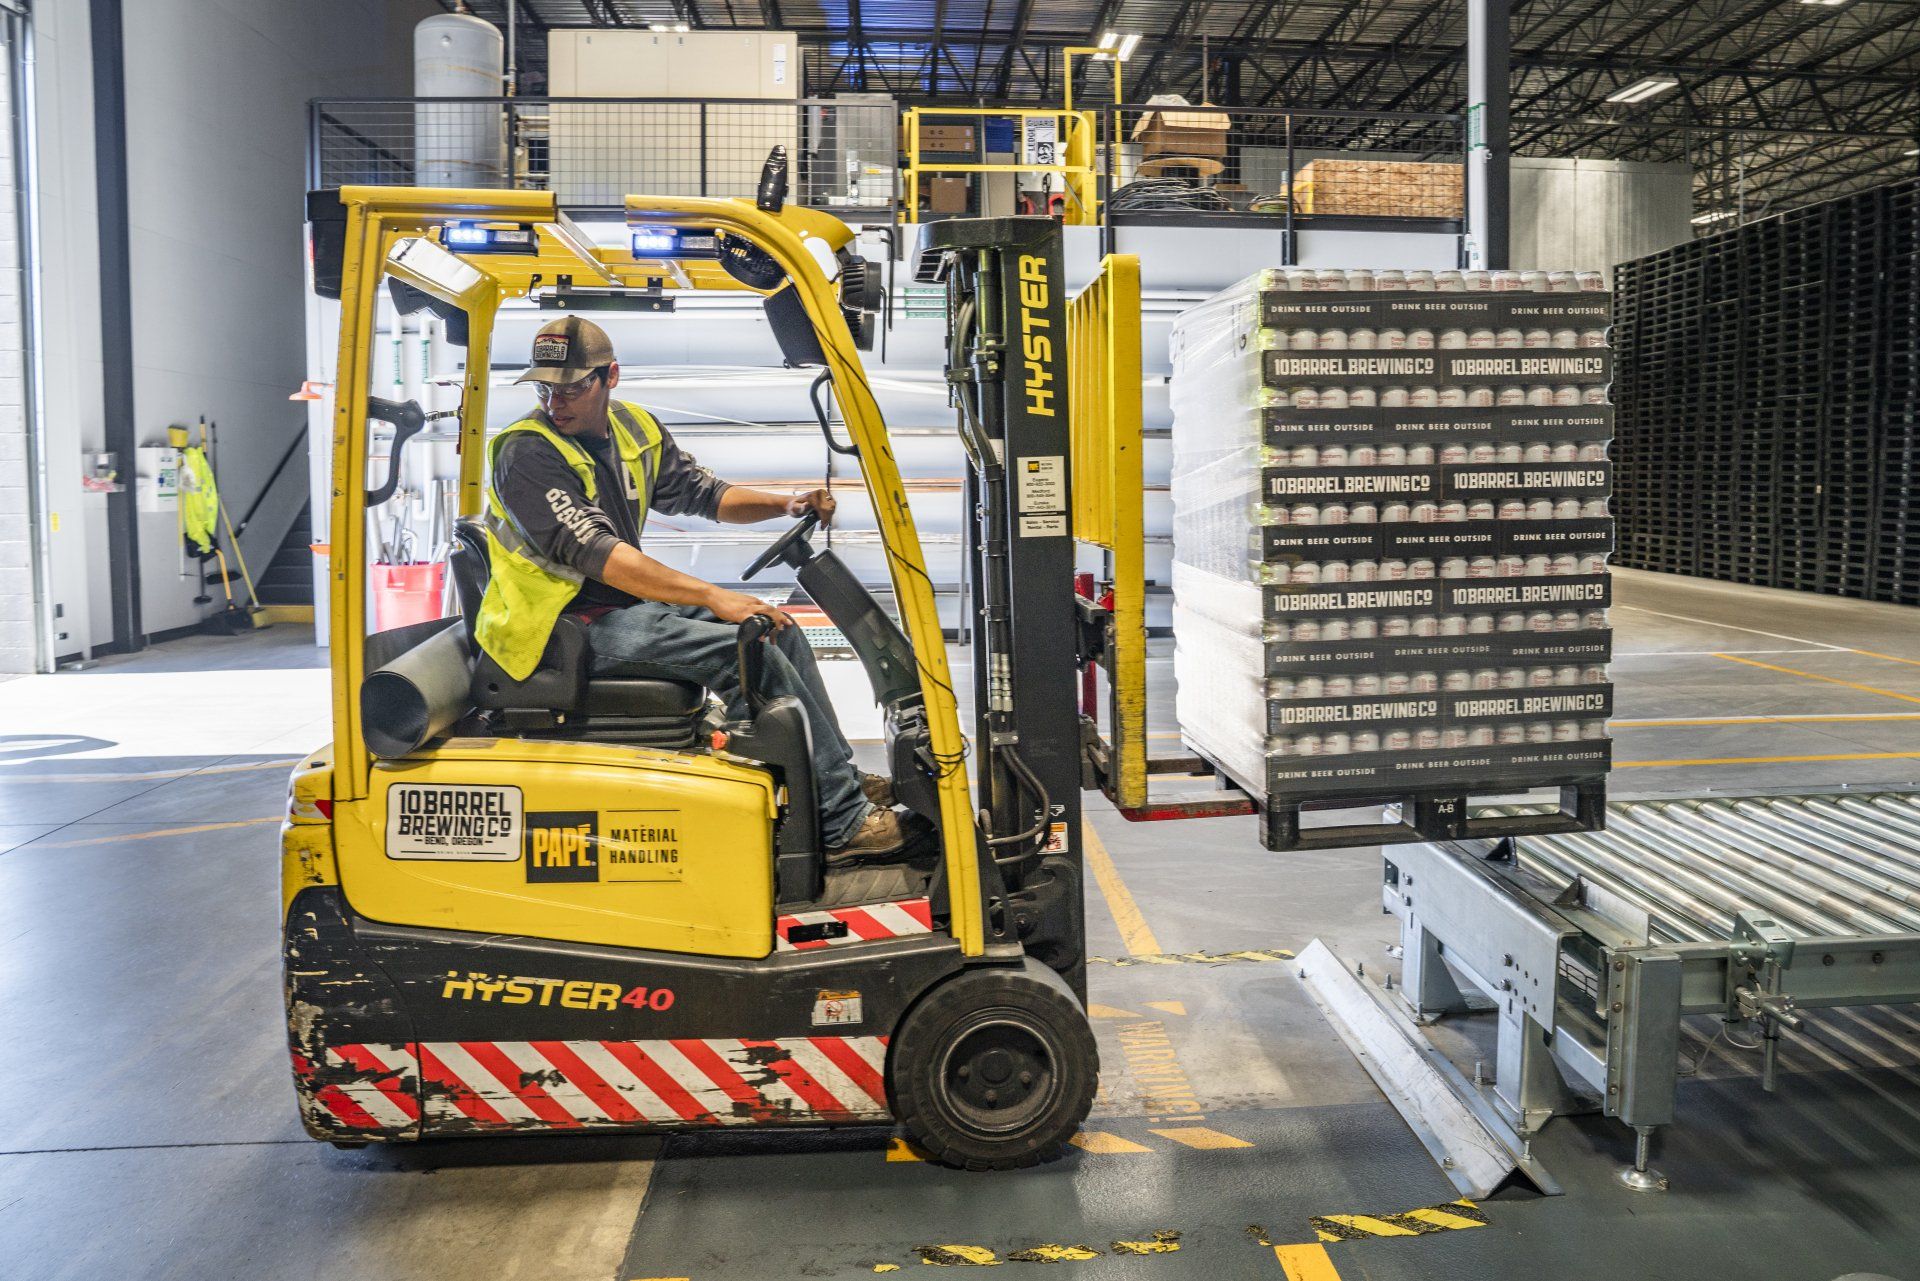 Man on forklift in warehouse